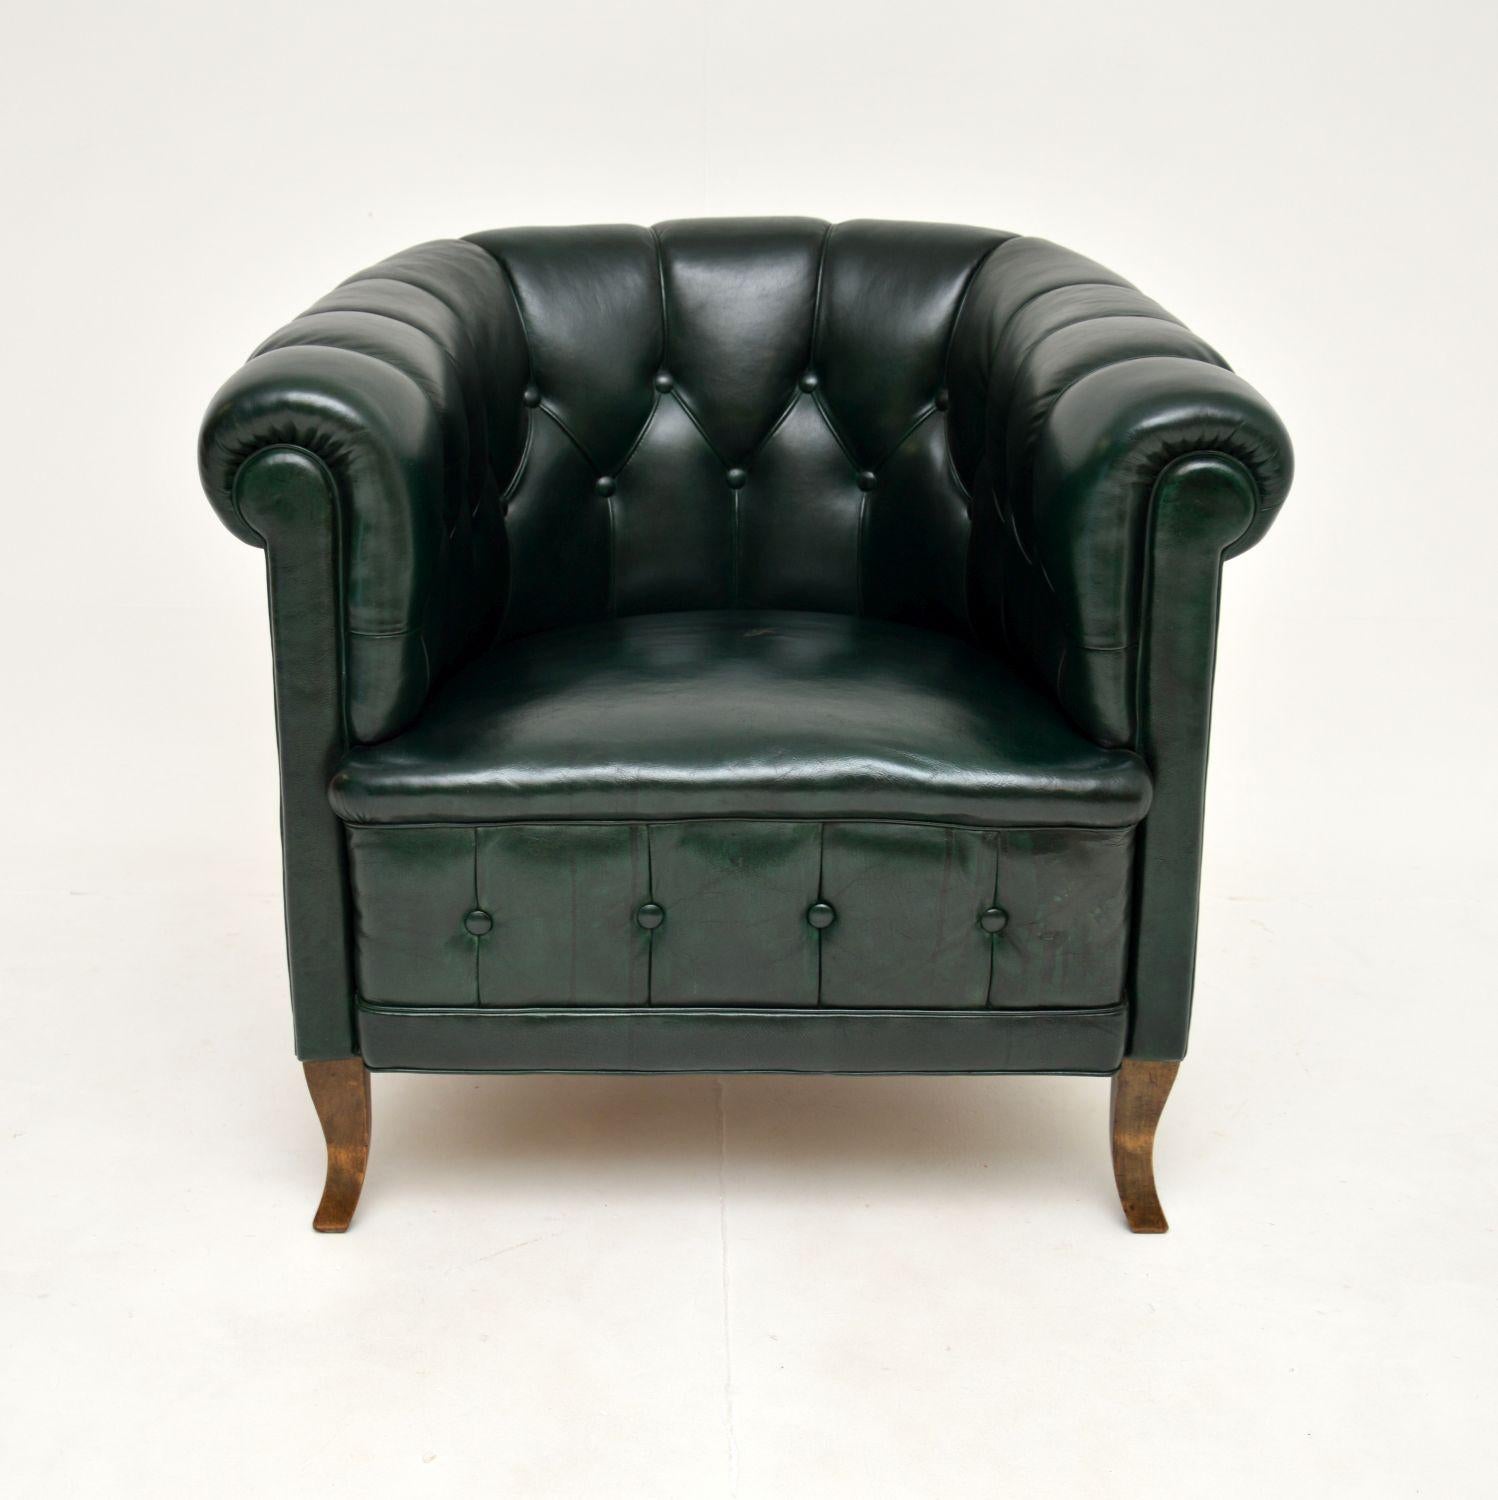 A fantastic antique Swedish leather club armchair, recently imported from Sweden and dating from around 1900-1920.

It is of superb quality, it is well sprung and very comfortable. The green leather is original & has a gorgeous colour tone, this has